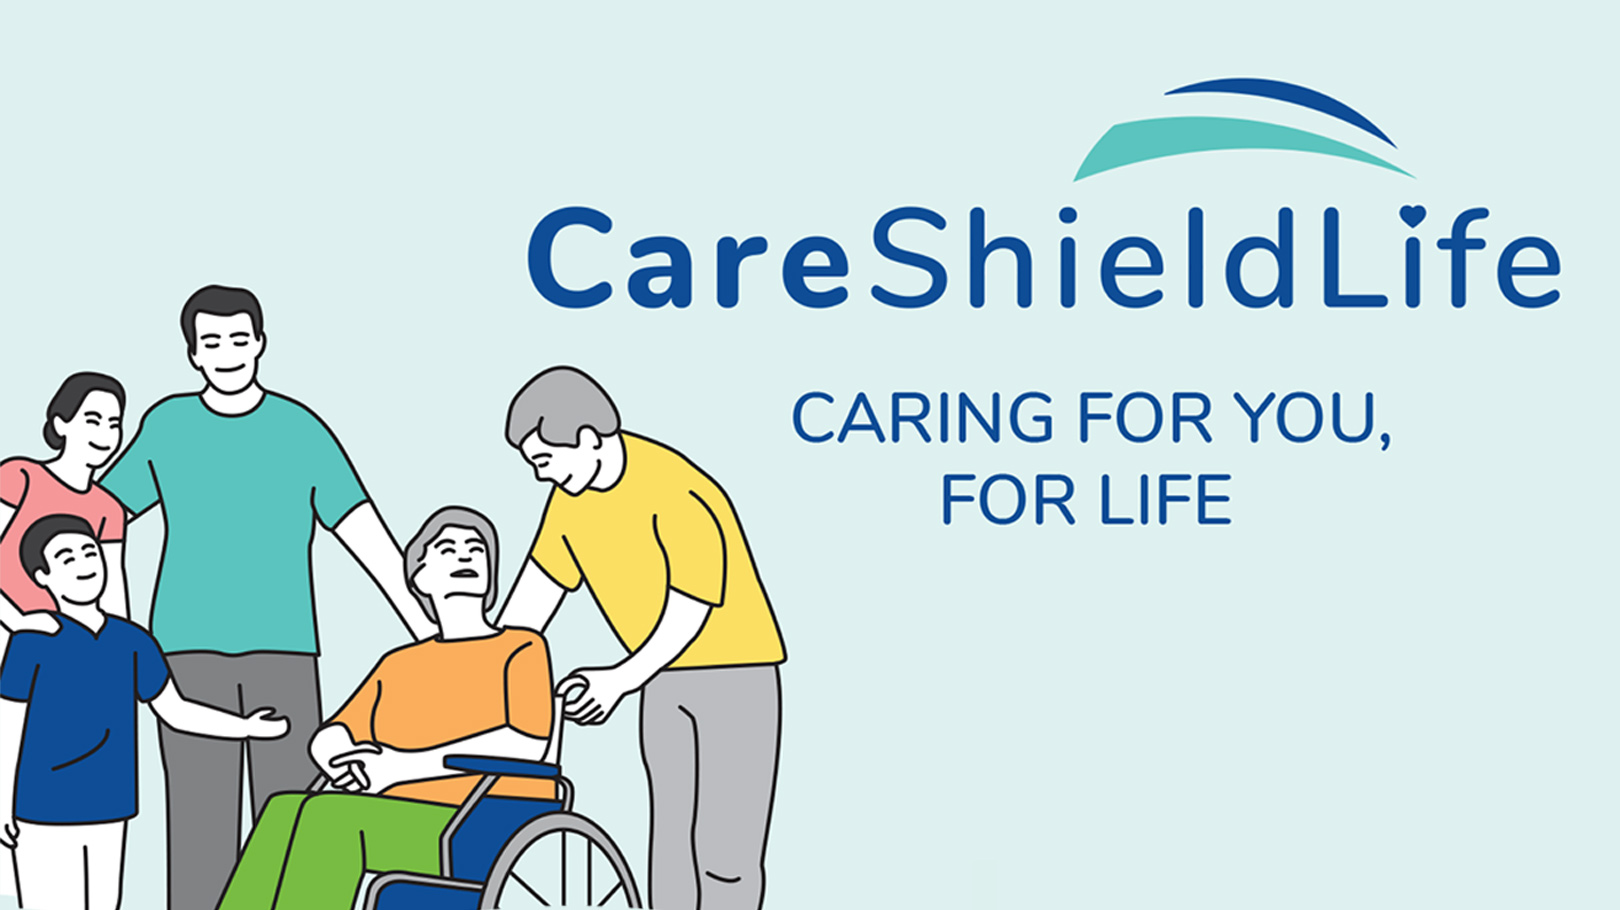 CareShield Life is to help you financially should you become severely disabled and require long-term care. Here is what you should know.